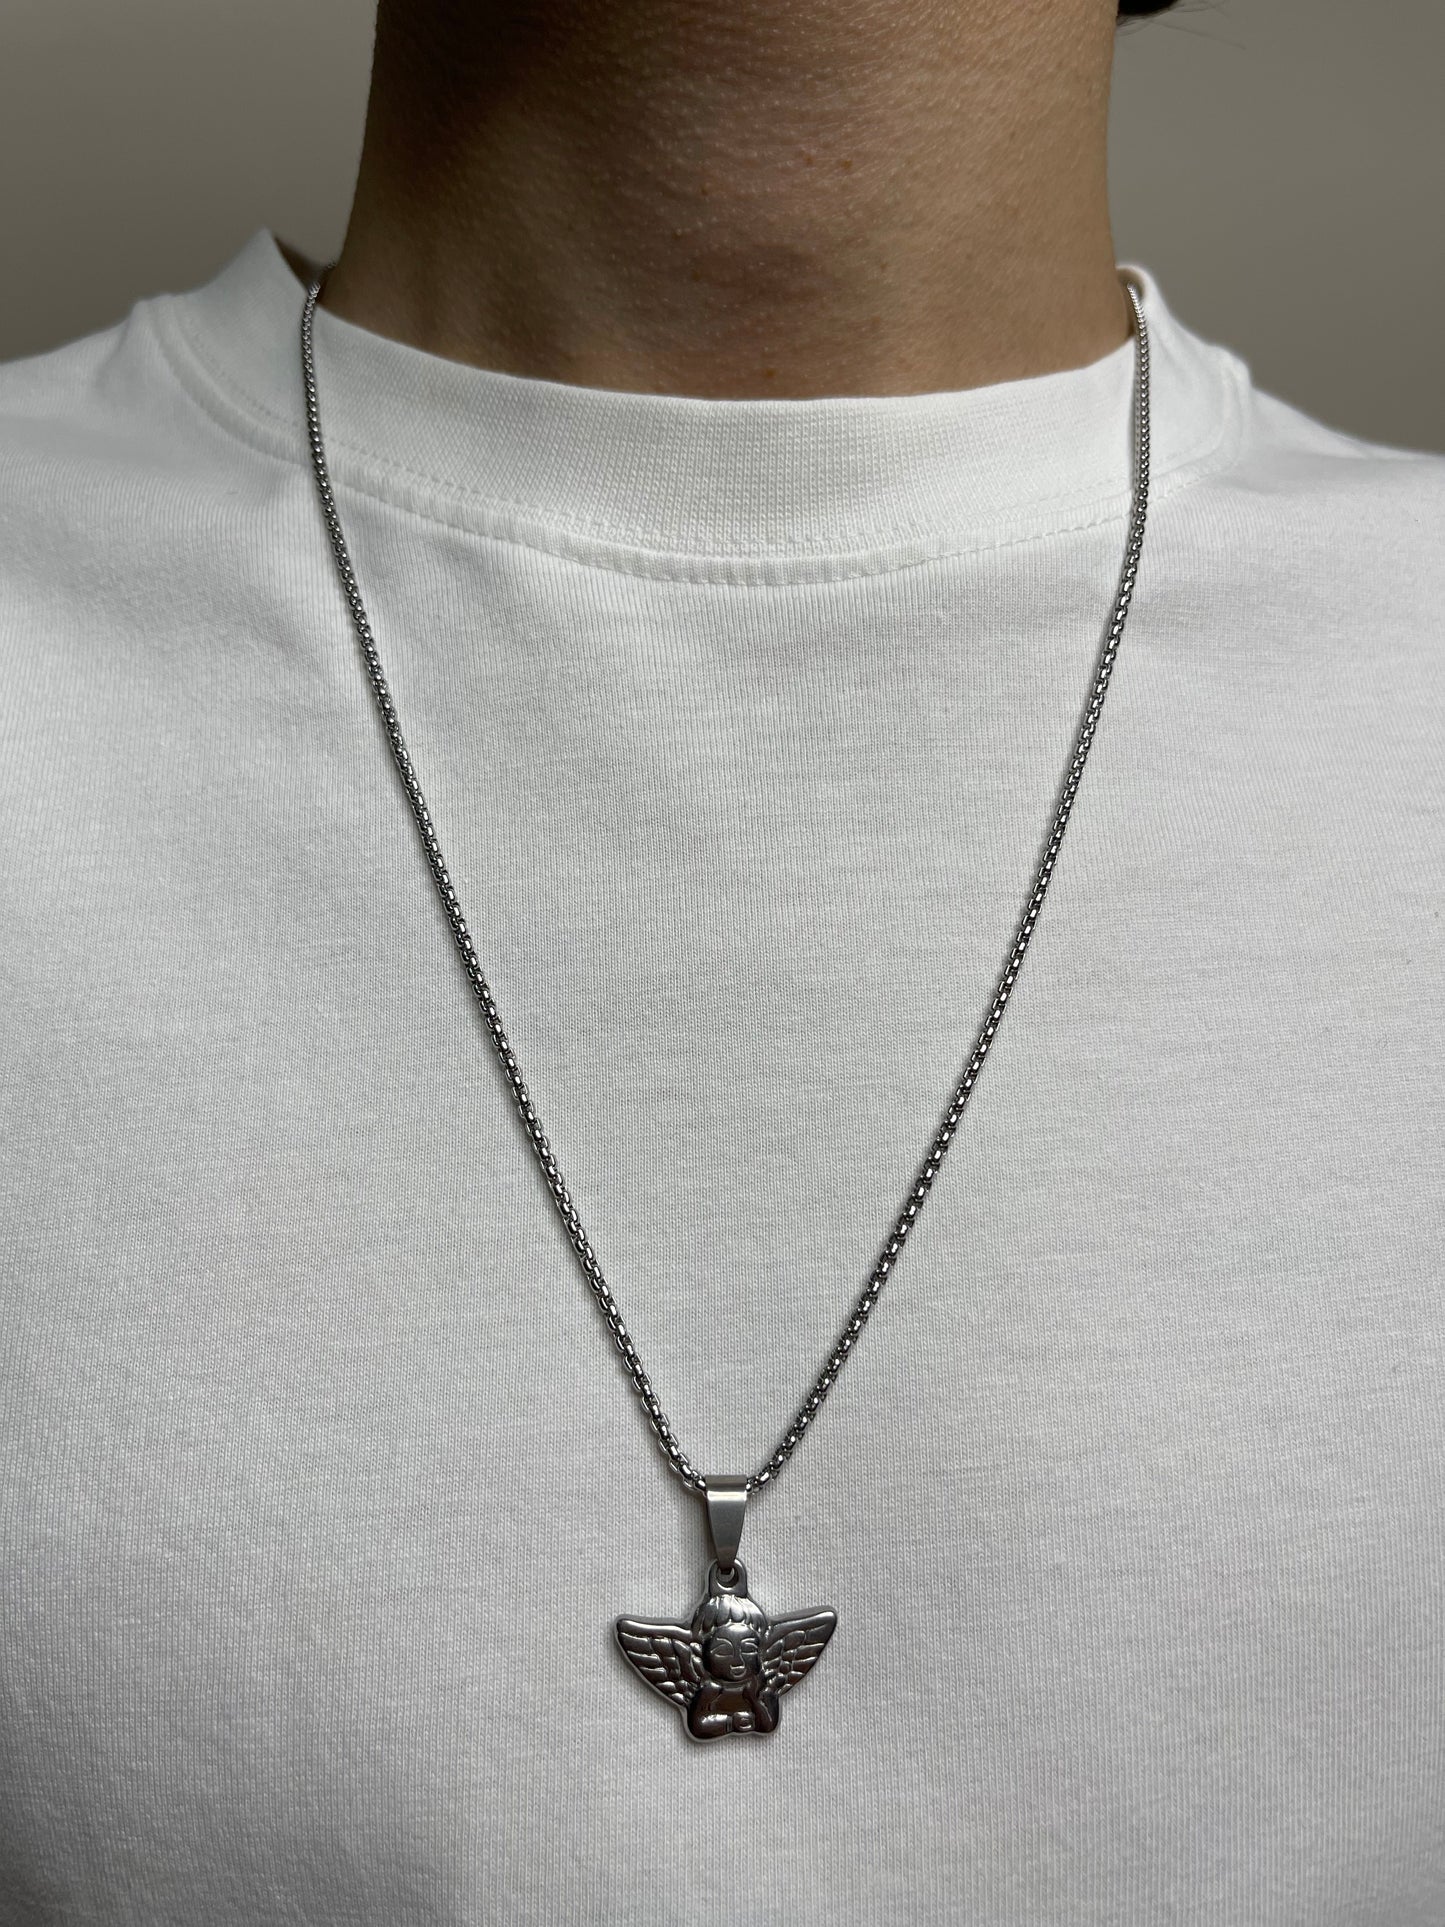 "THE ANGEL'S WATCH" PENDANT NECKLACE | SILVER